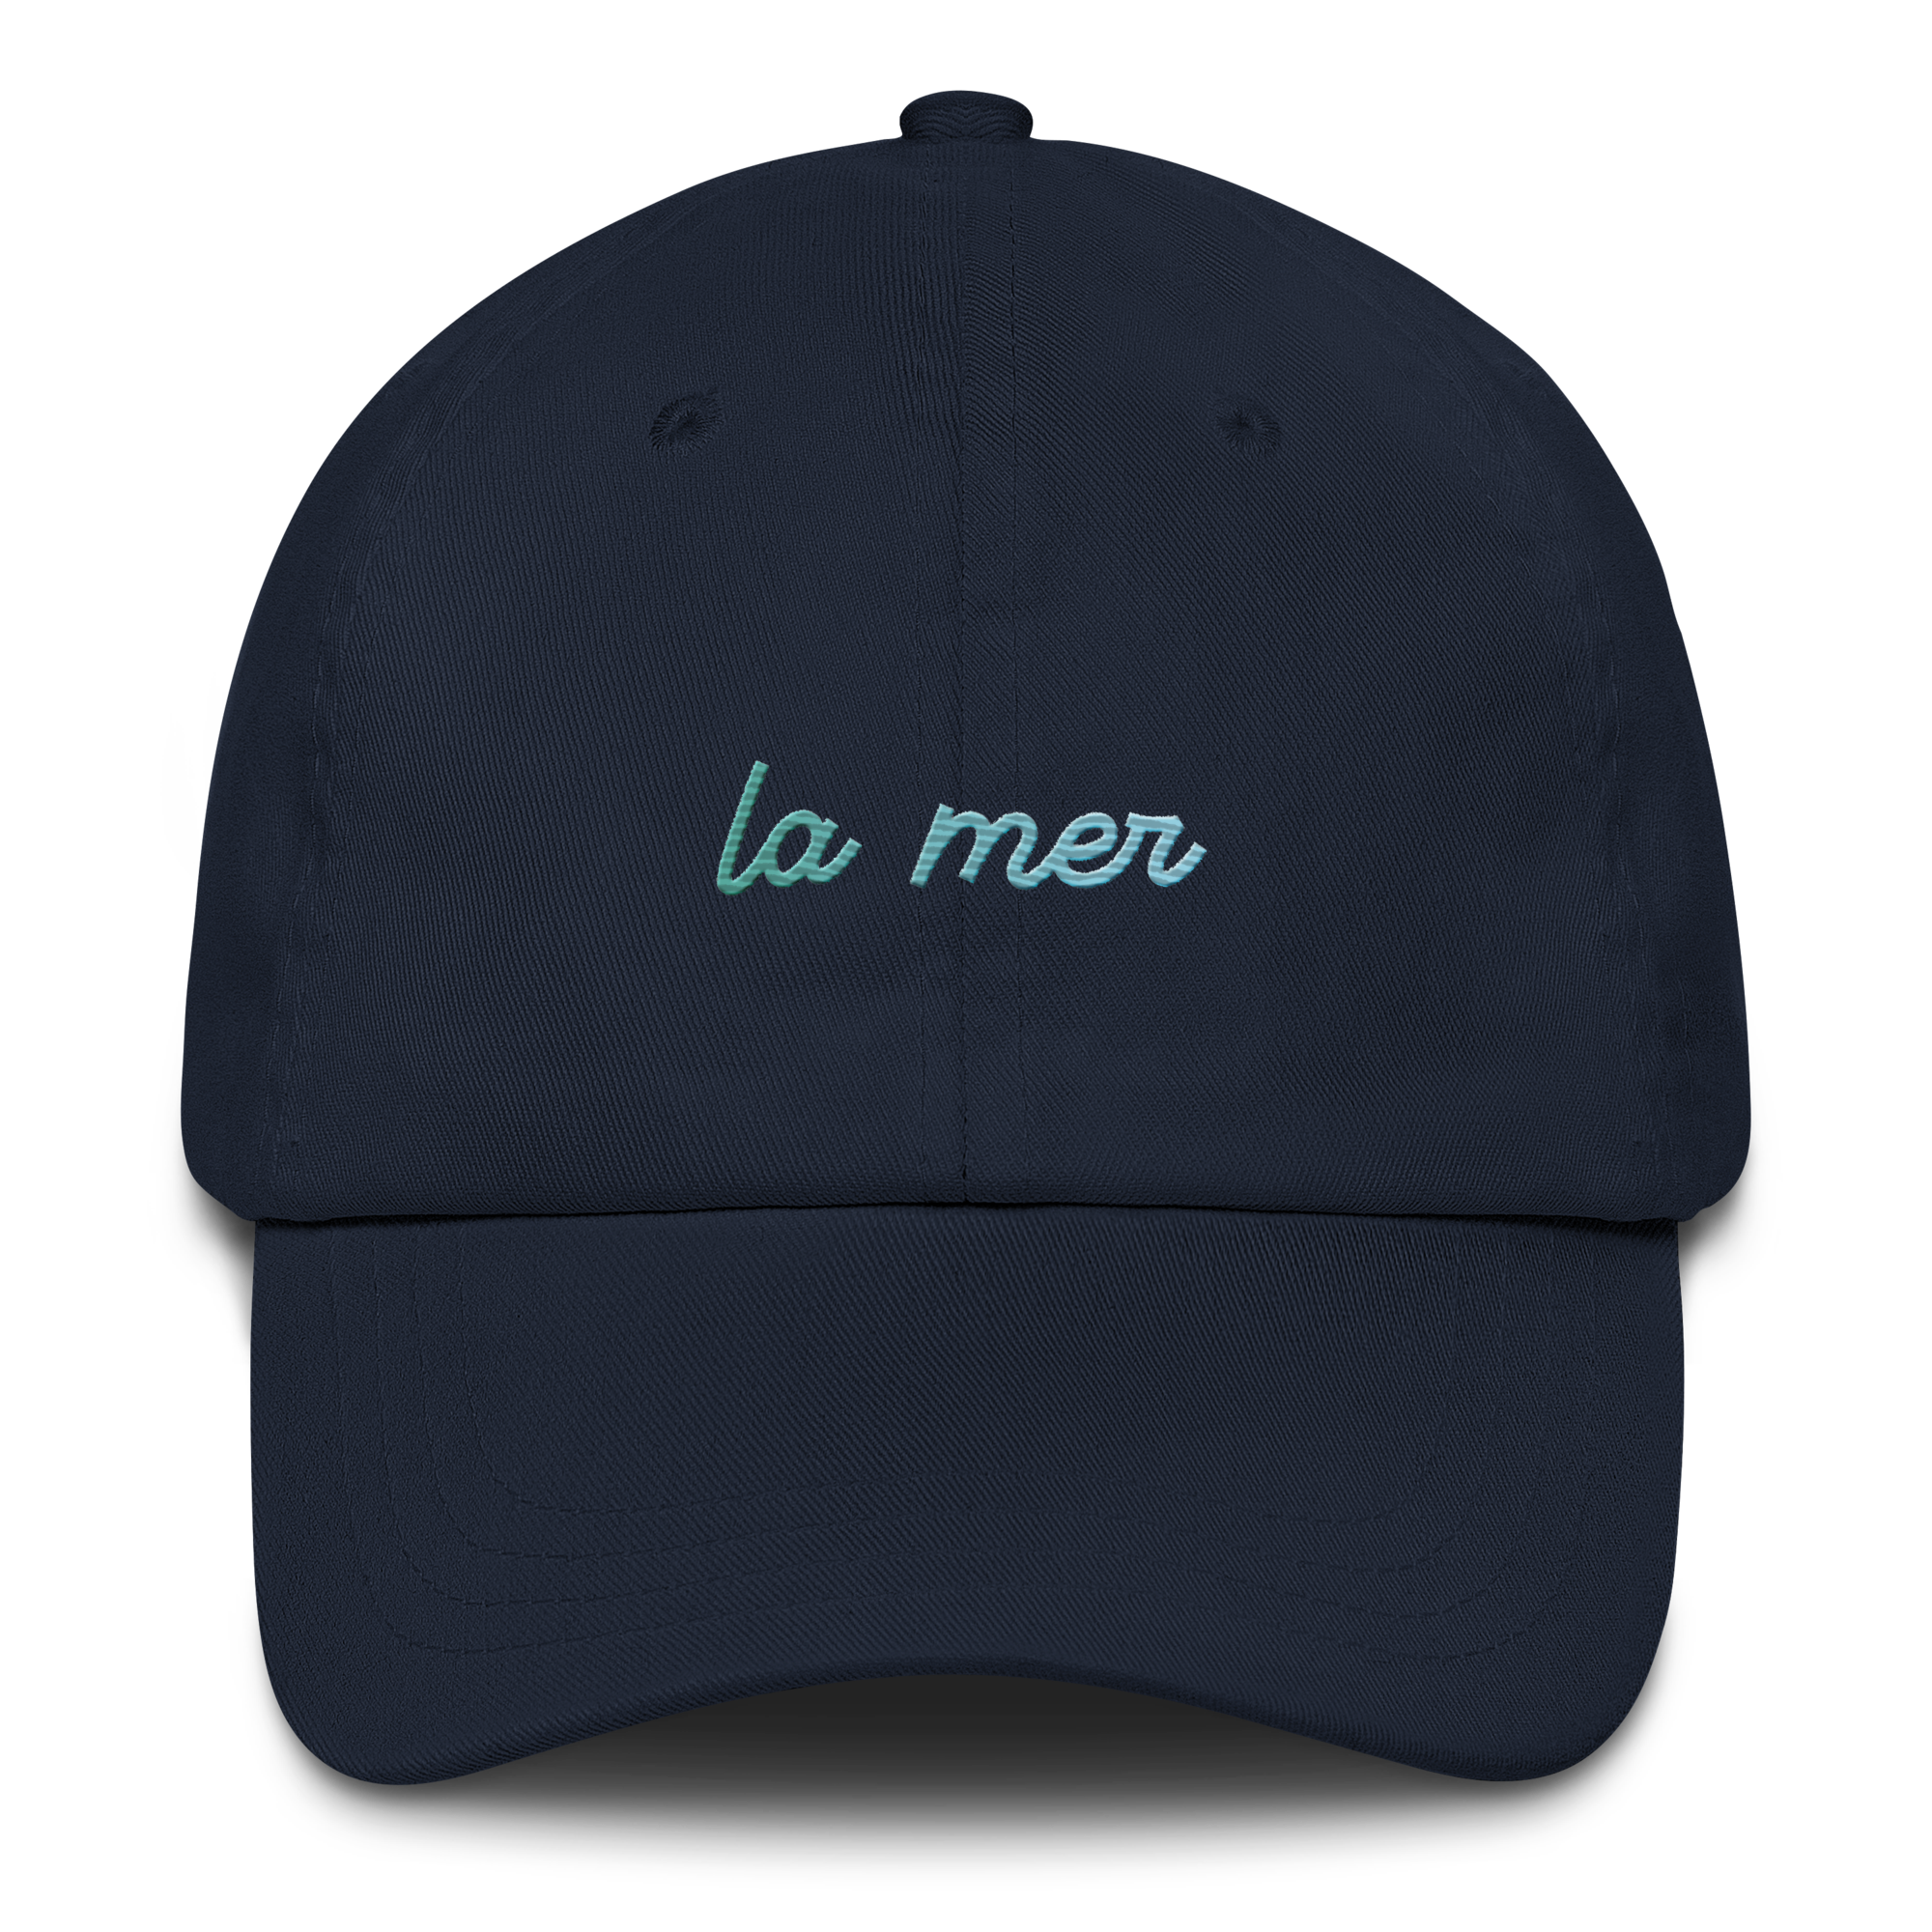 classic-dad-hat-navy-front-6671b428f0f40.png